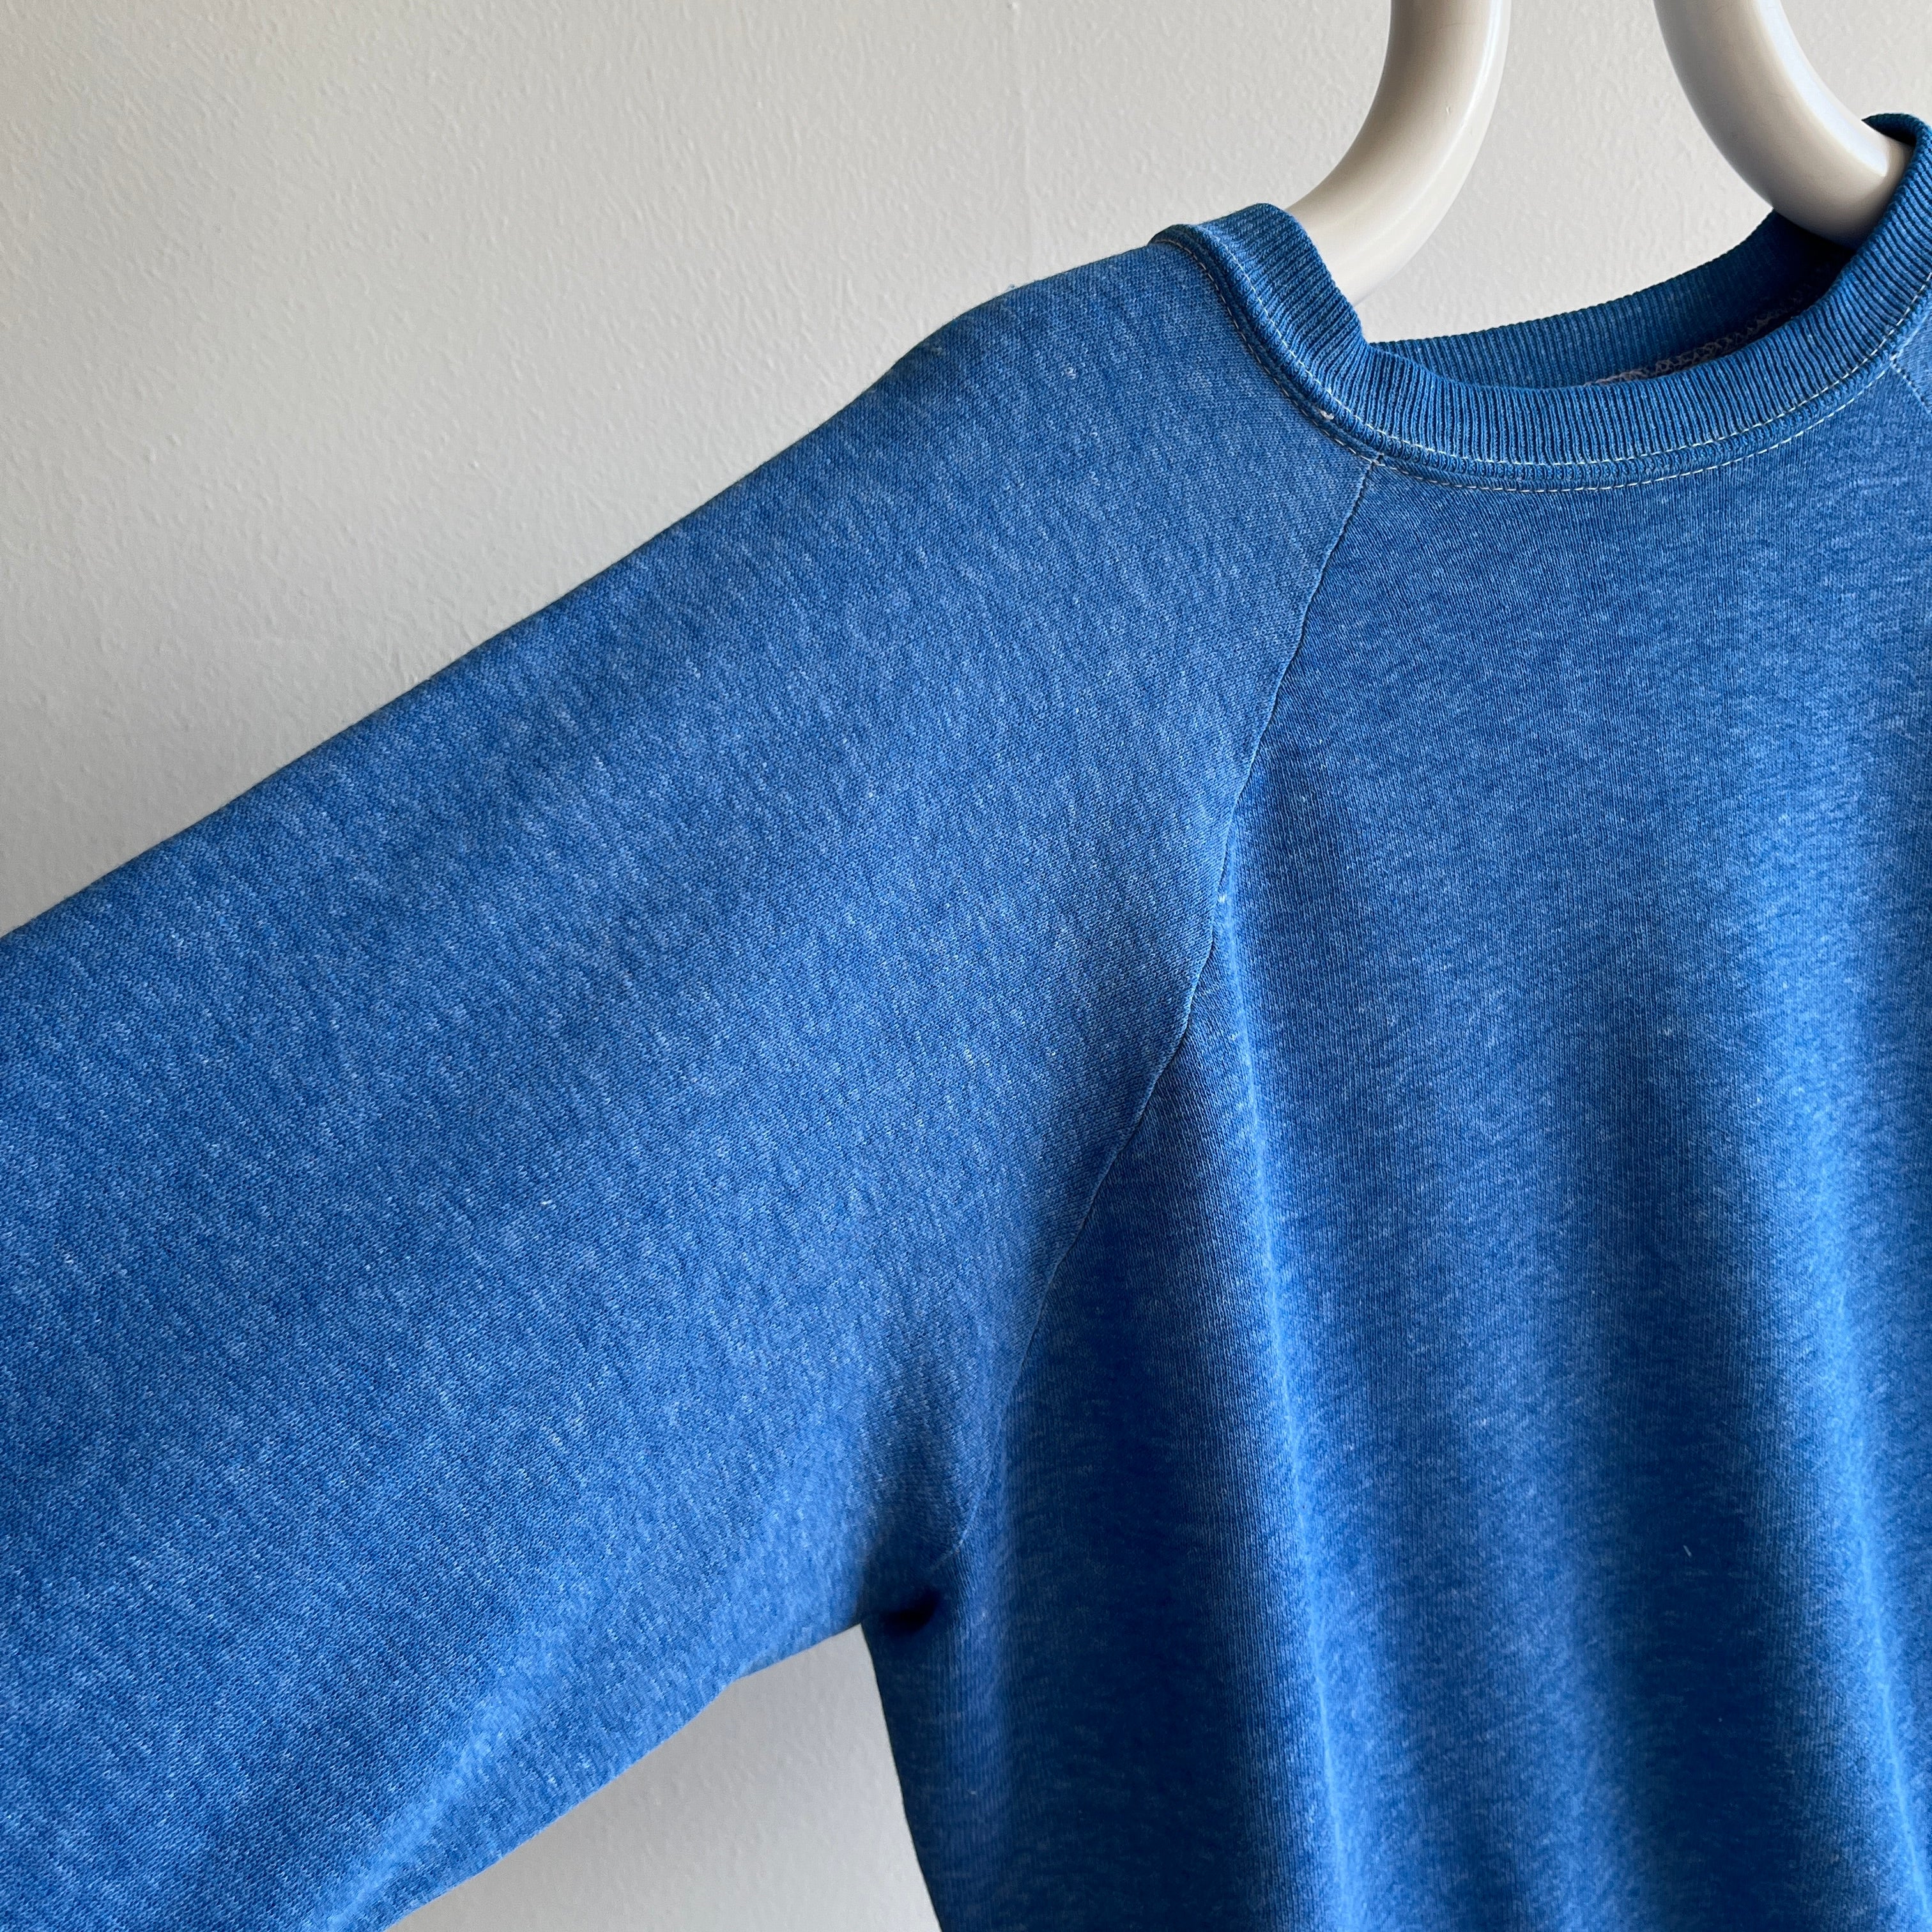 1970s Light Blue Ultra Super Soft and Worn with Contrast Stitching - WOWOWOW